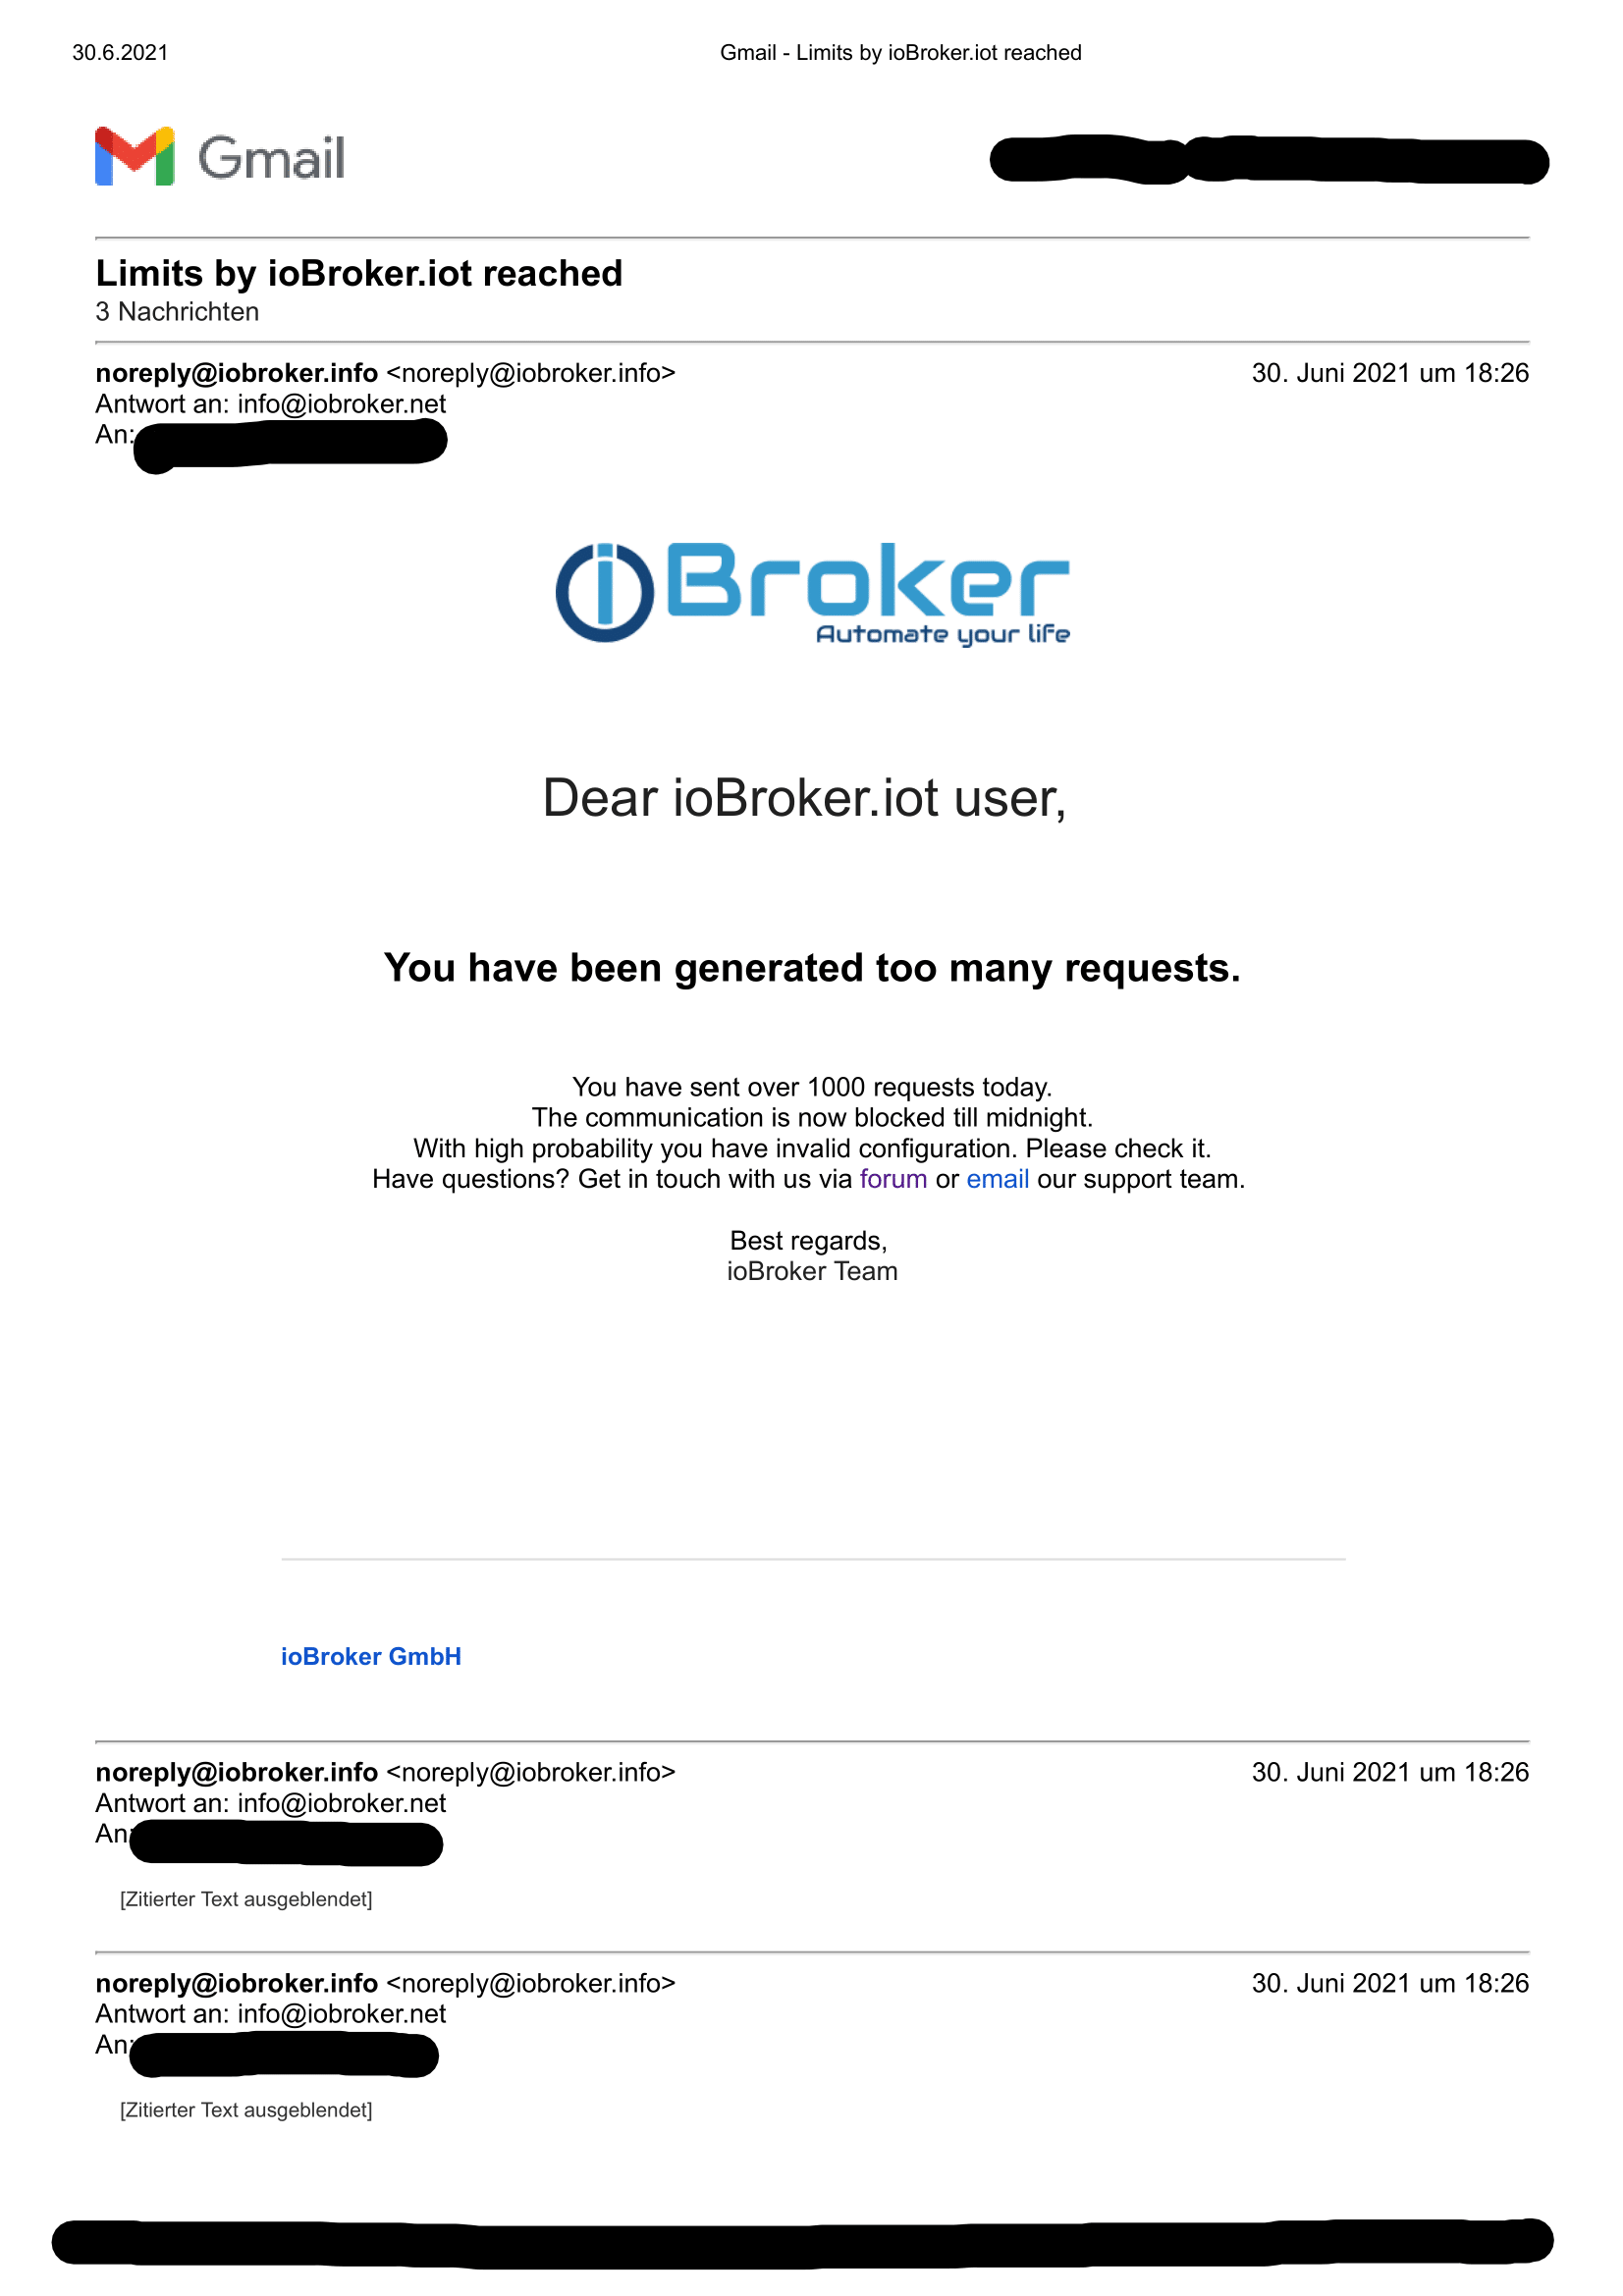 Gmail - Limits by ioBroker.iot reached (1)-1.png